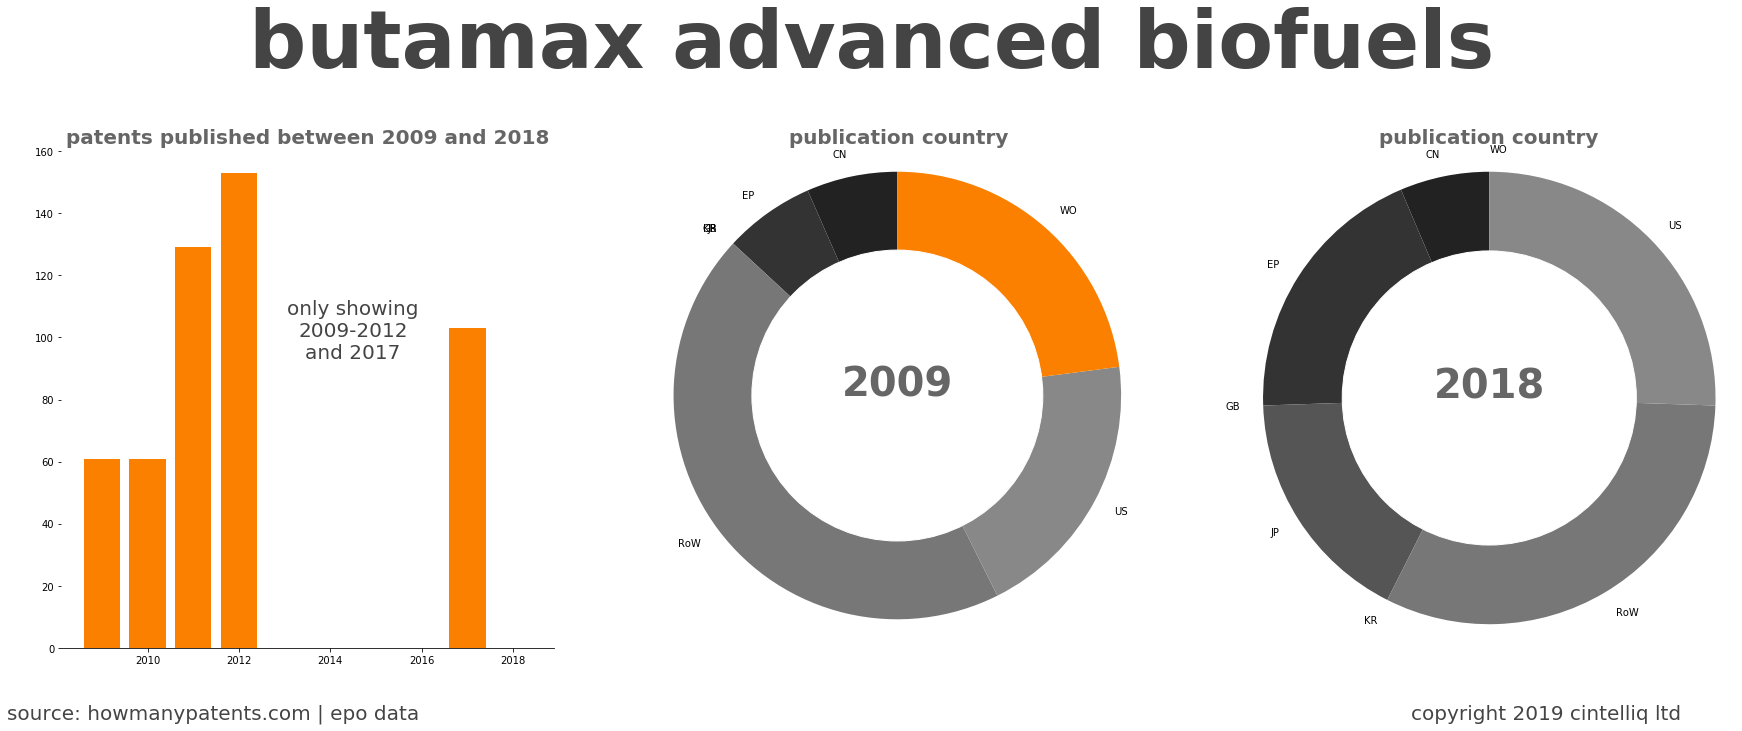 summary of patents for Butamax Advanced Biofuels